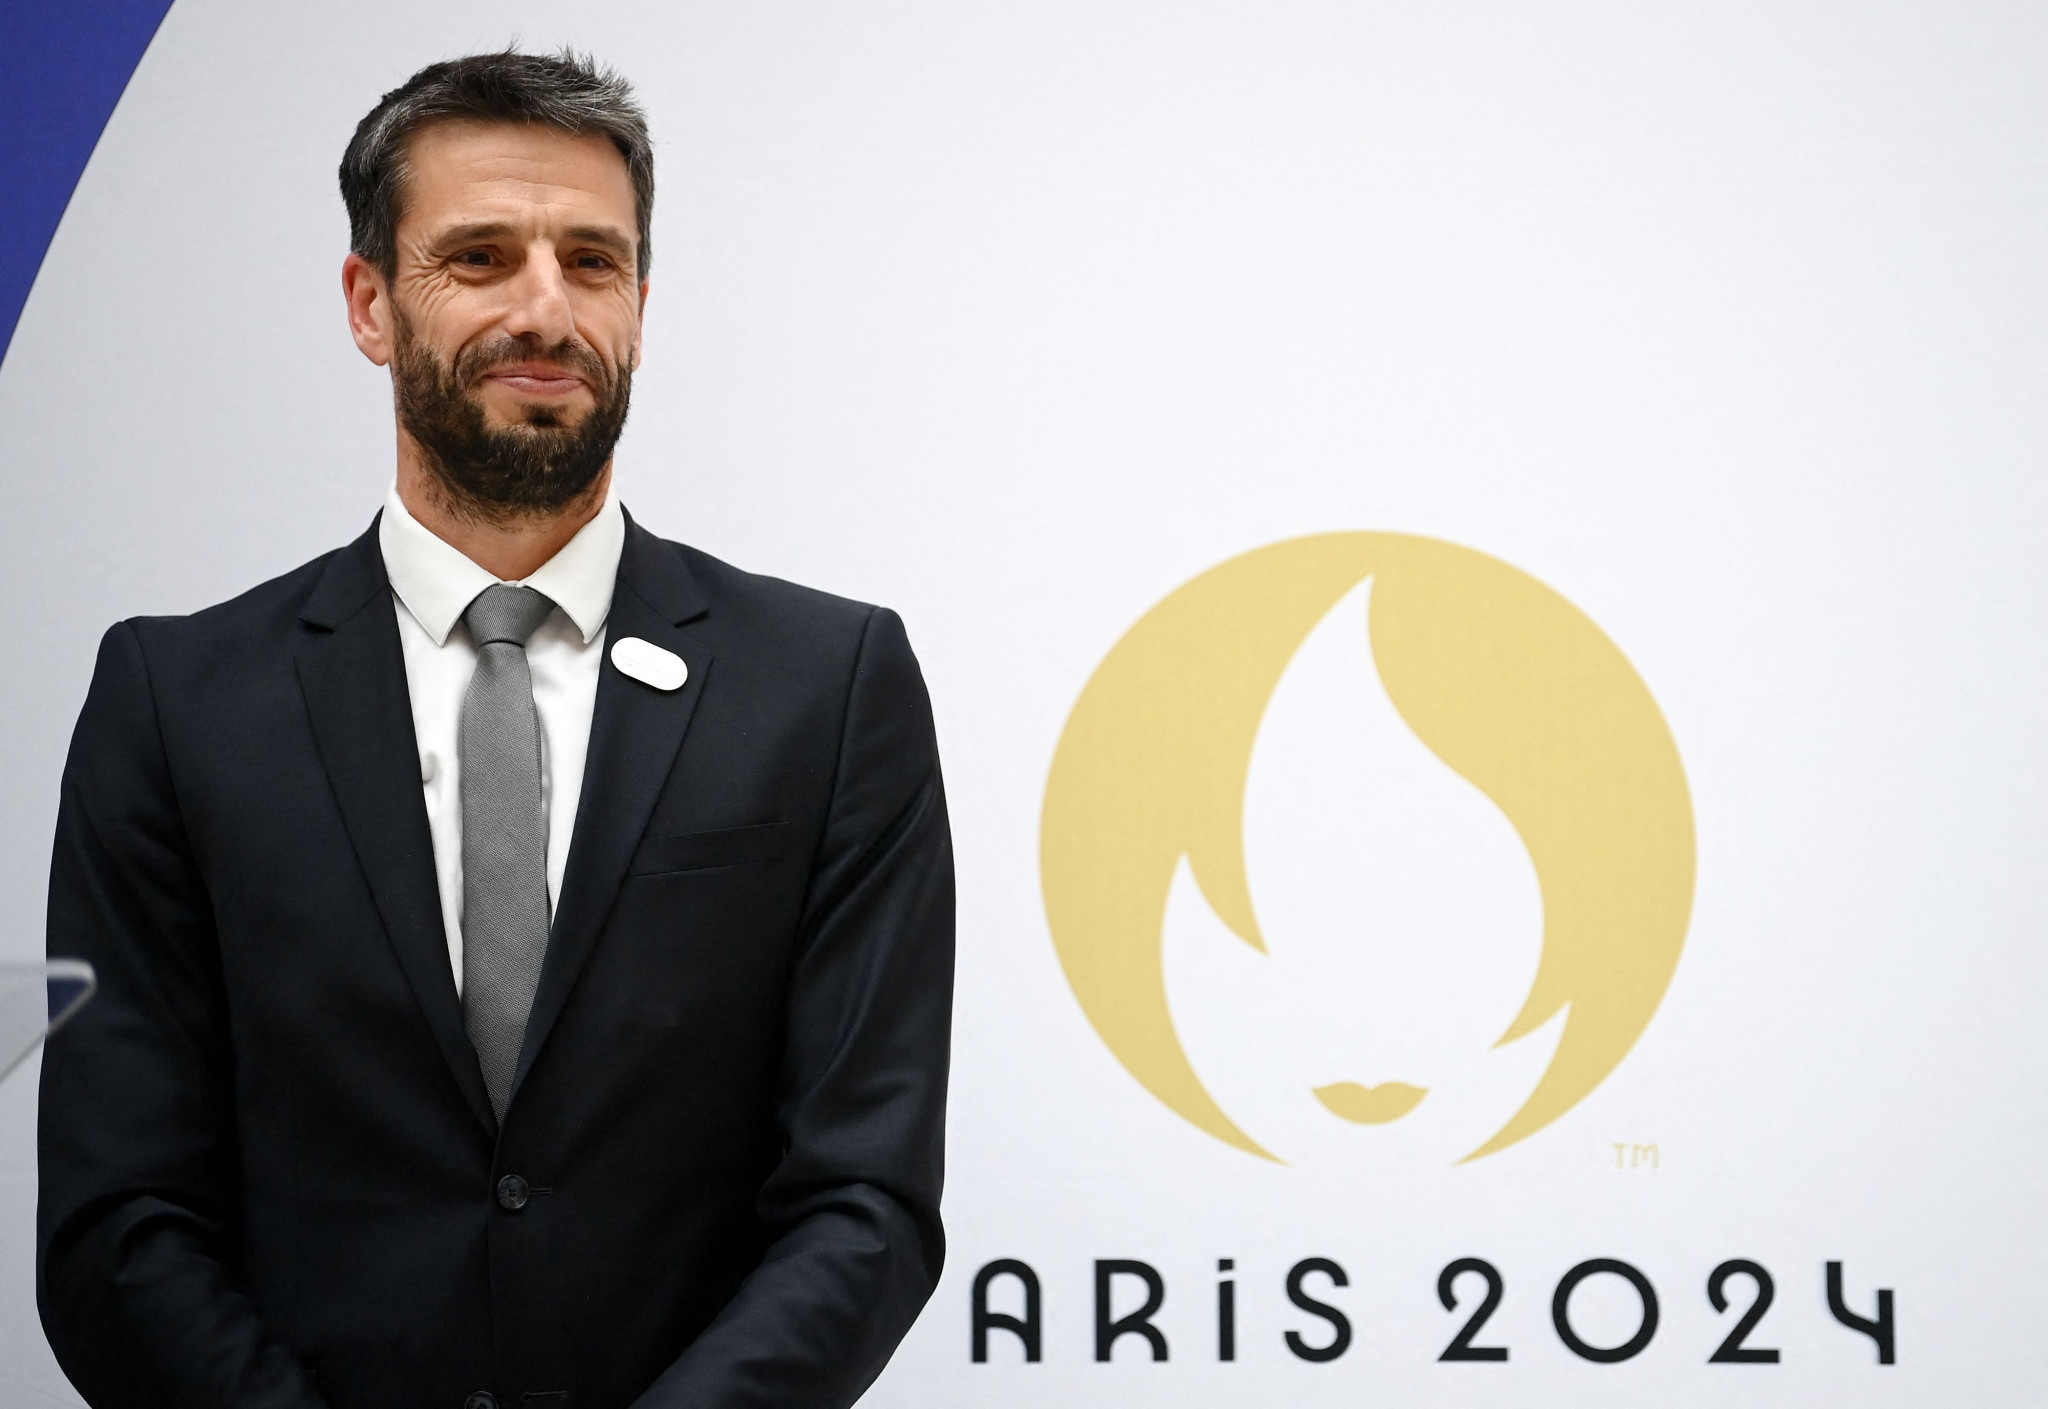 Paris 2024 President Tony Estanguet said more than 2.5 million people have registered for the ballot in the first ticketing phase ©Getty Images